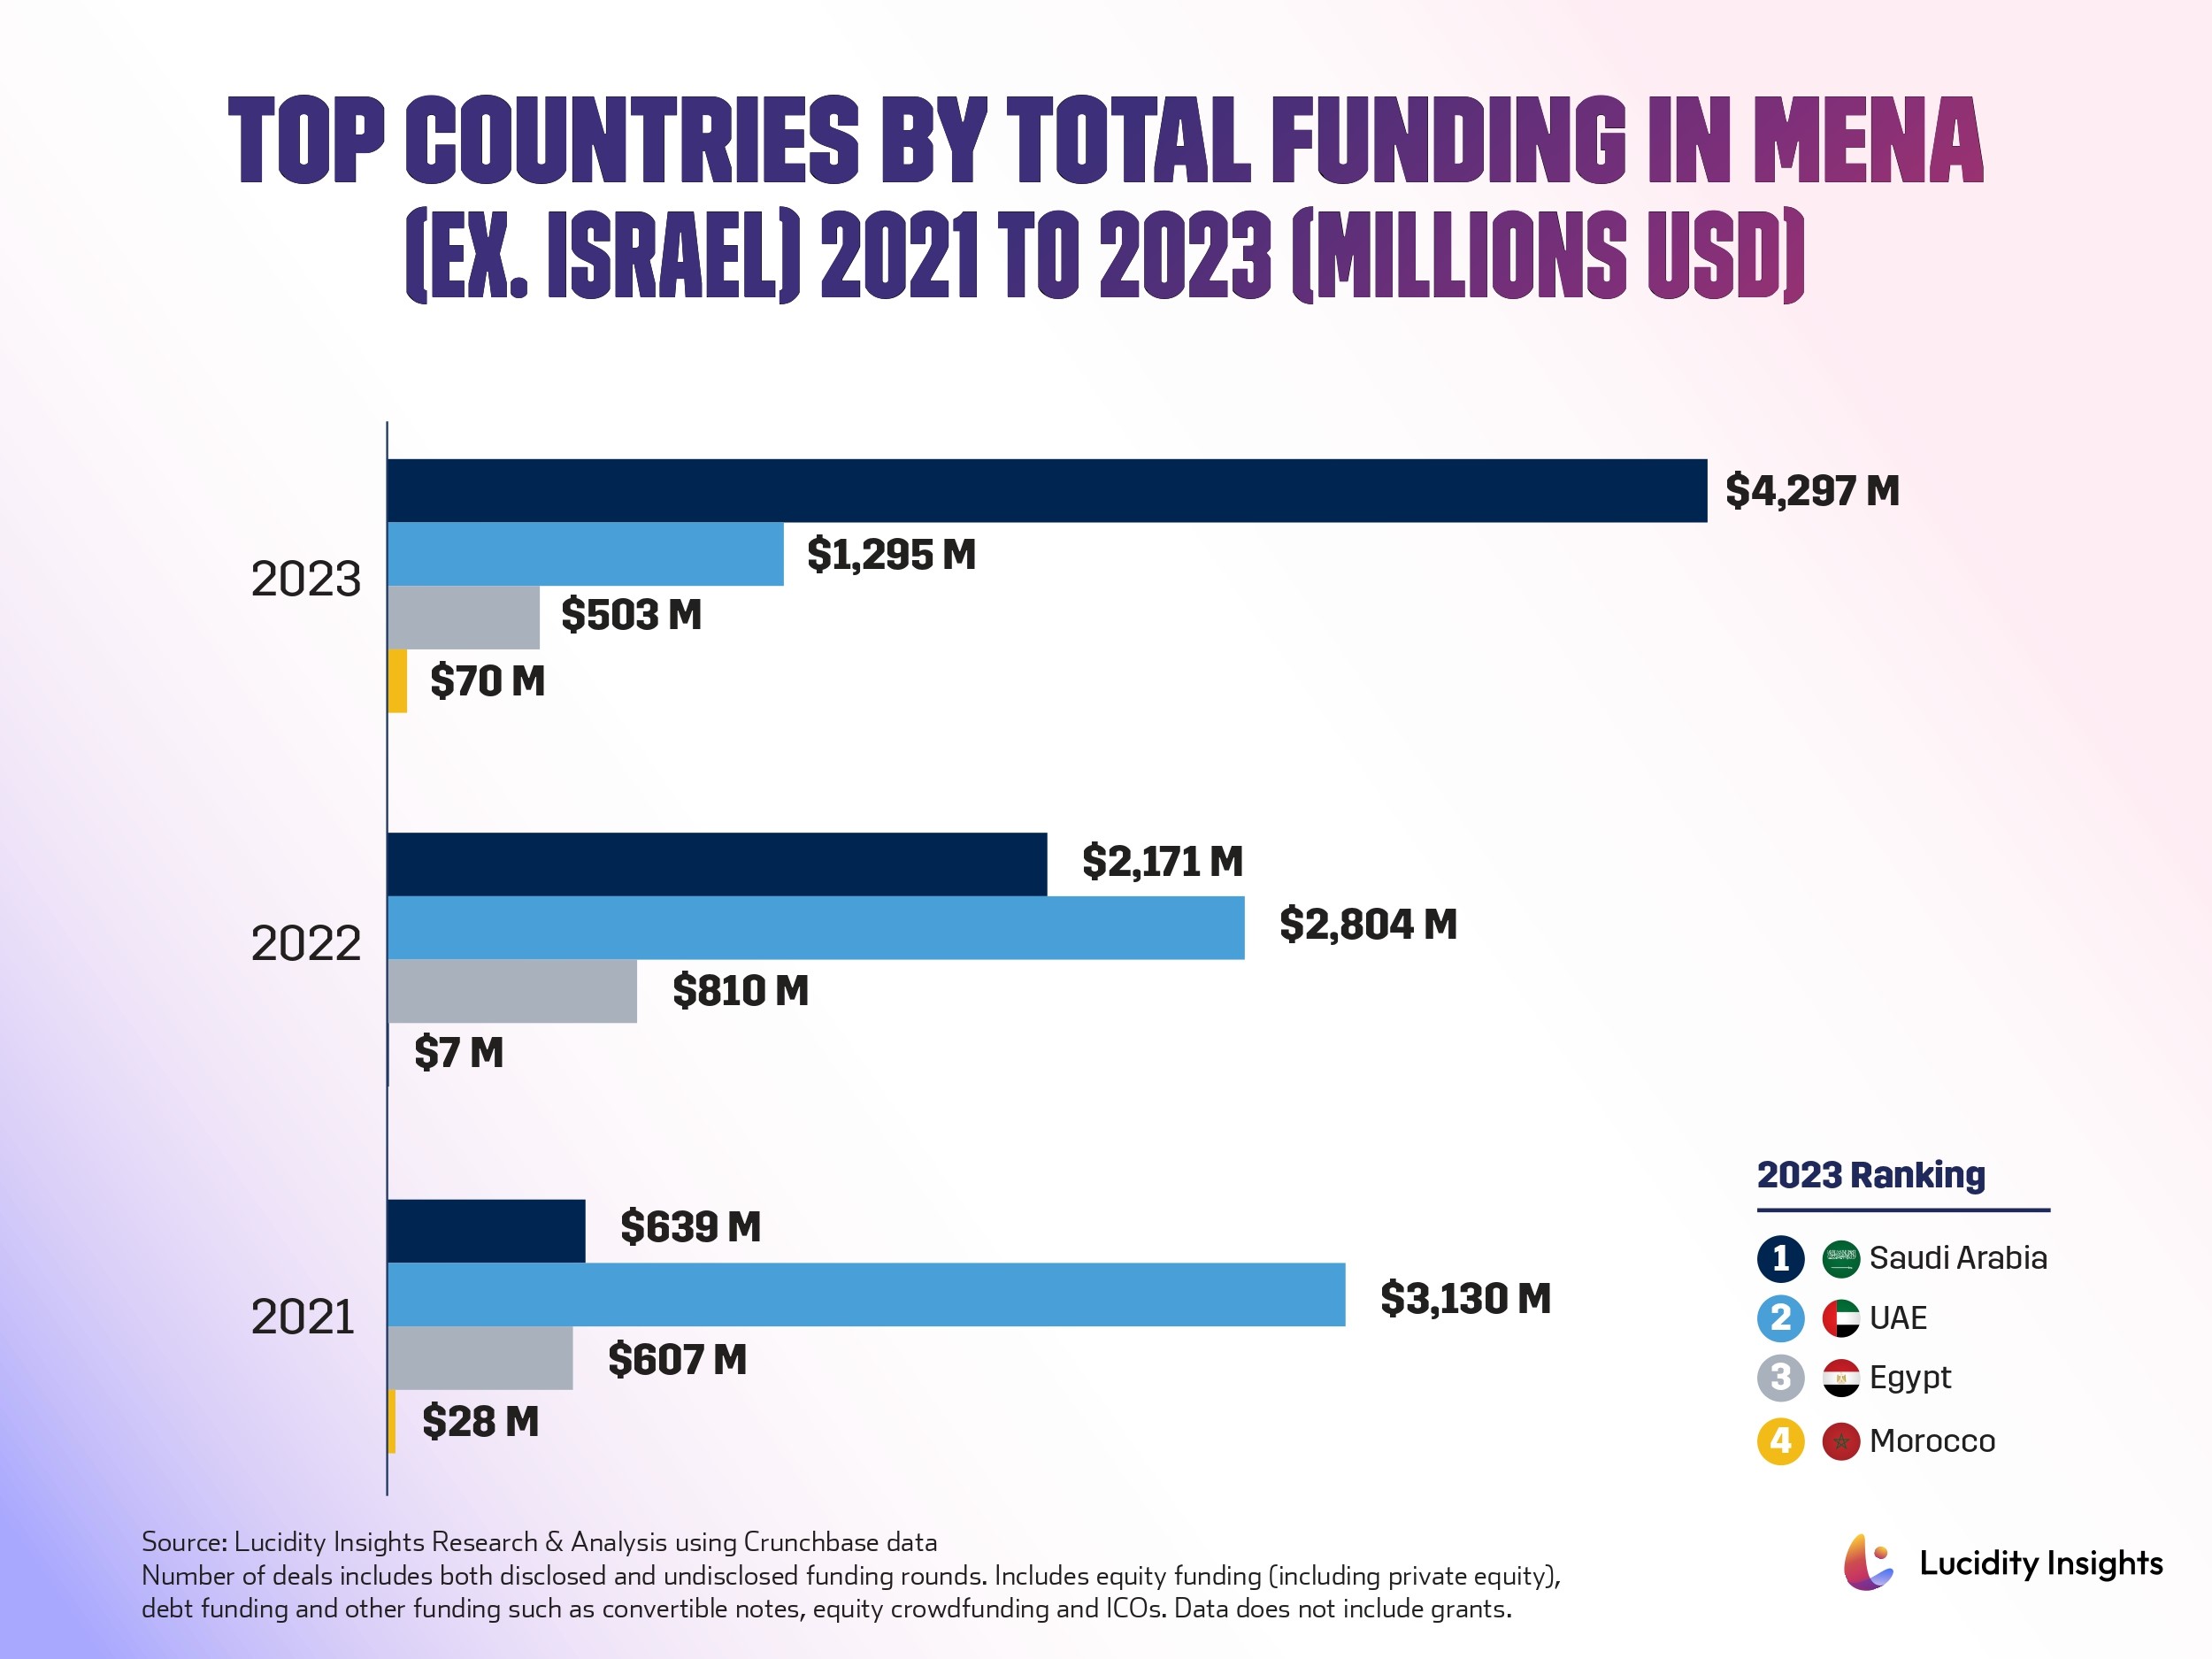 Top Countries by Total Funding in MENA (Ex. Israel) 2021 to 2023 (Millions USD)